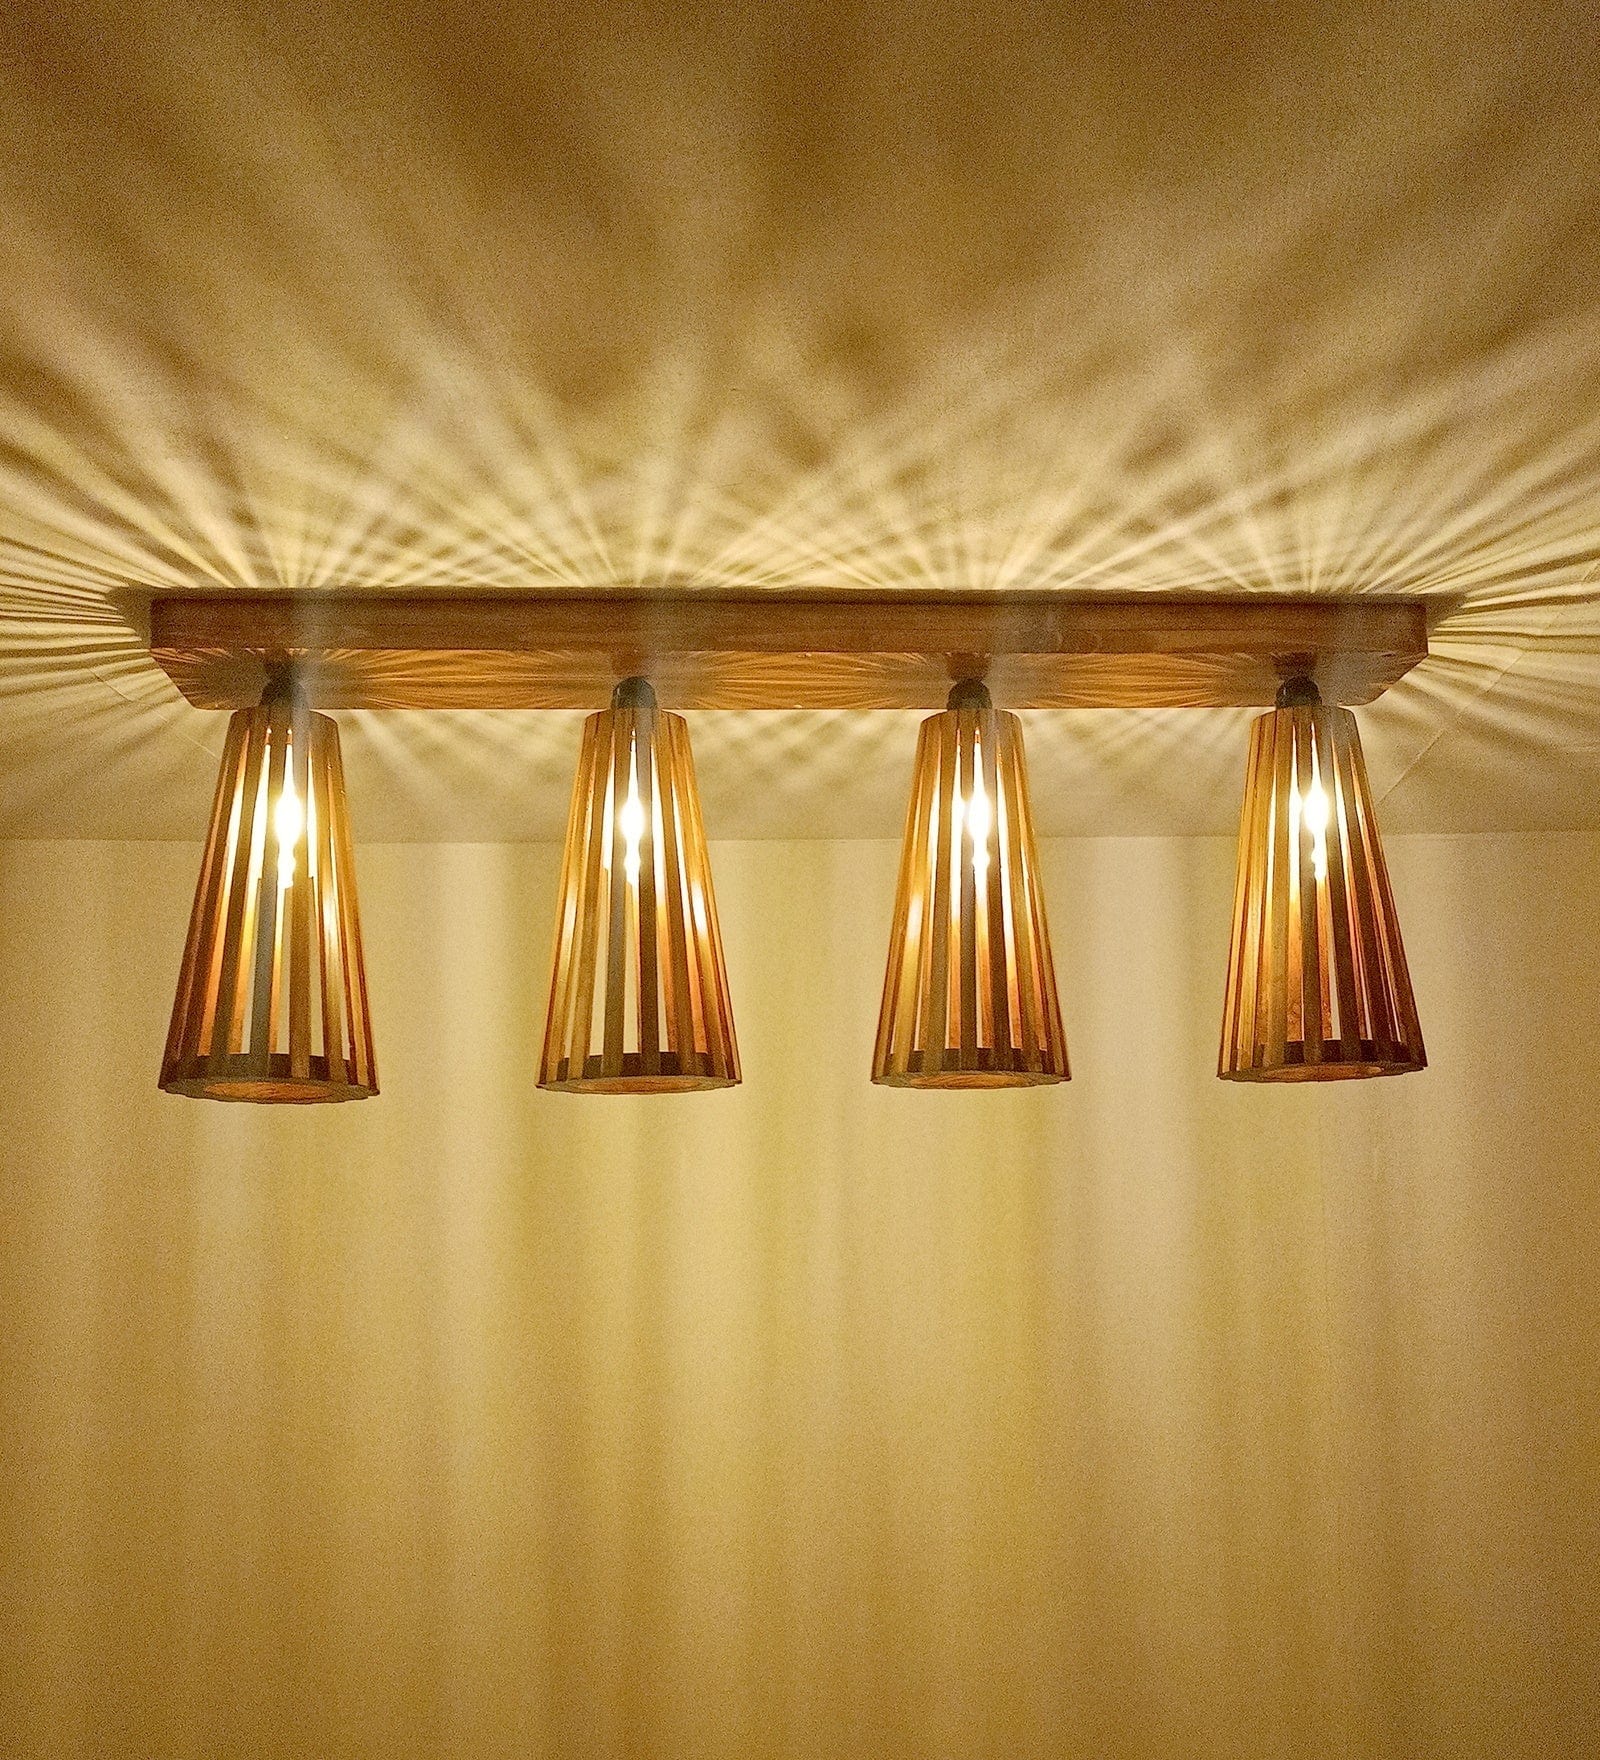 Billet Brown Wooden 4 Series Ceiling Lamp (BULB NOT INCLUDED)